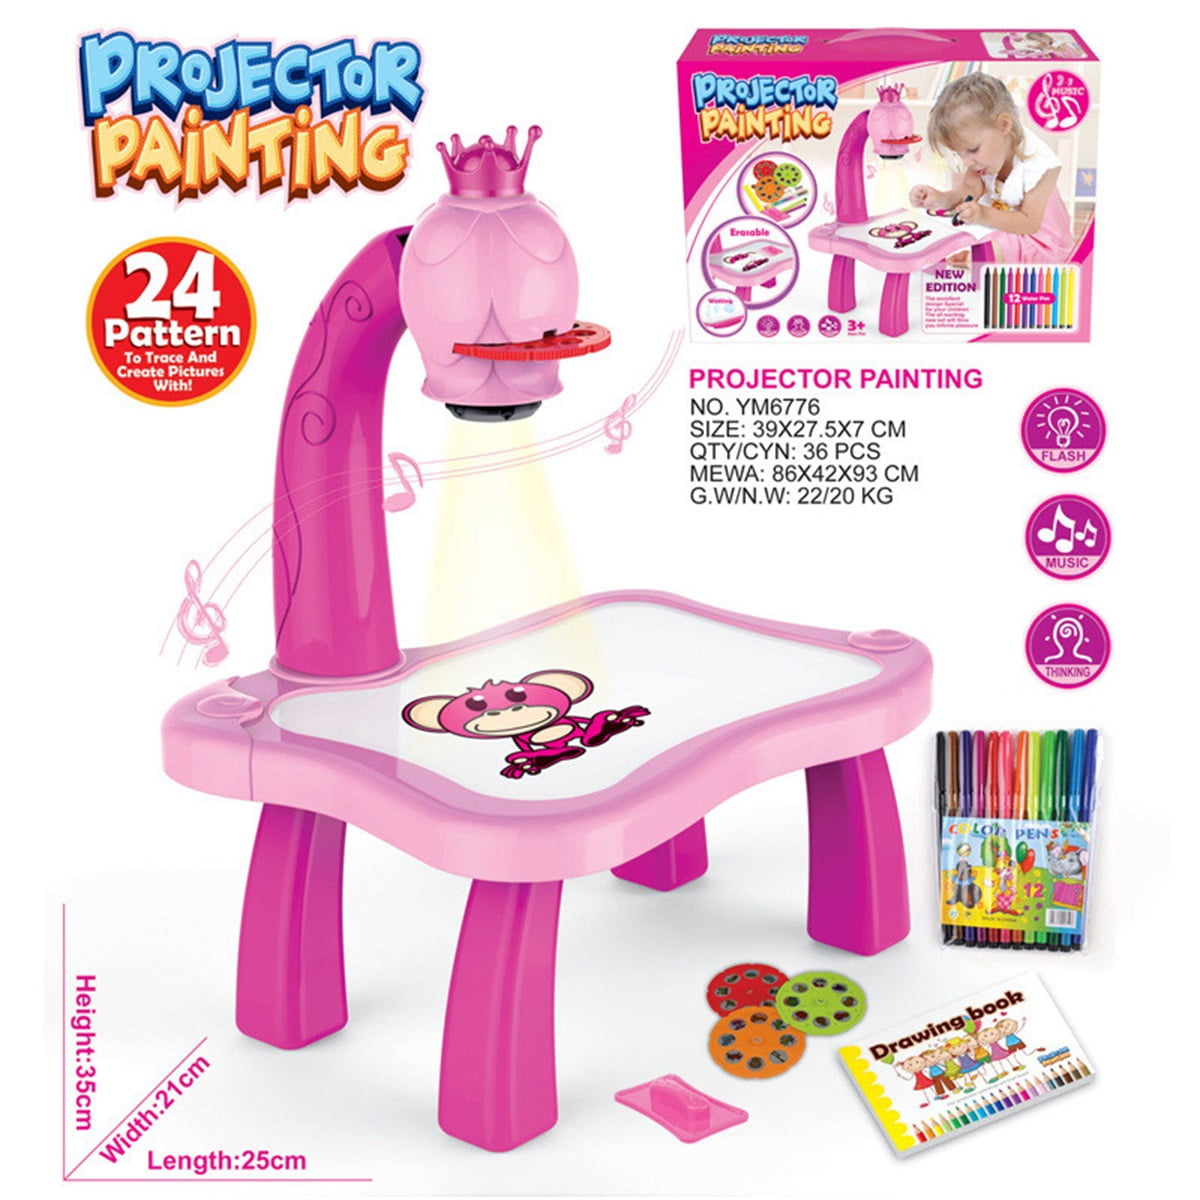 Drawing Projector Painting kit - Kids Drawing Board with Music Projection  Painting Set Drawing Art Table Doodle Board Table for Girls & Boys  Educational Learning Toys for Toddlers 1 2 3 Year Olds 